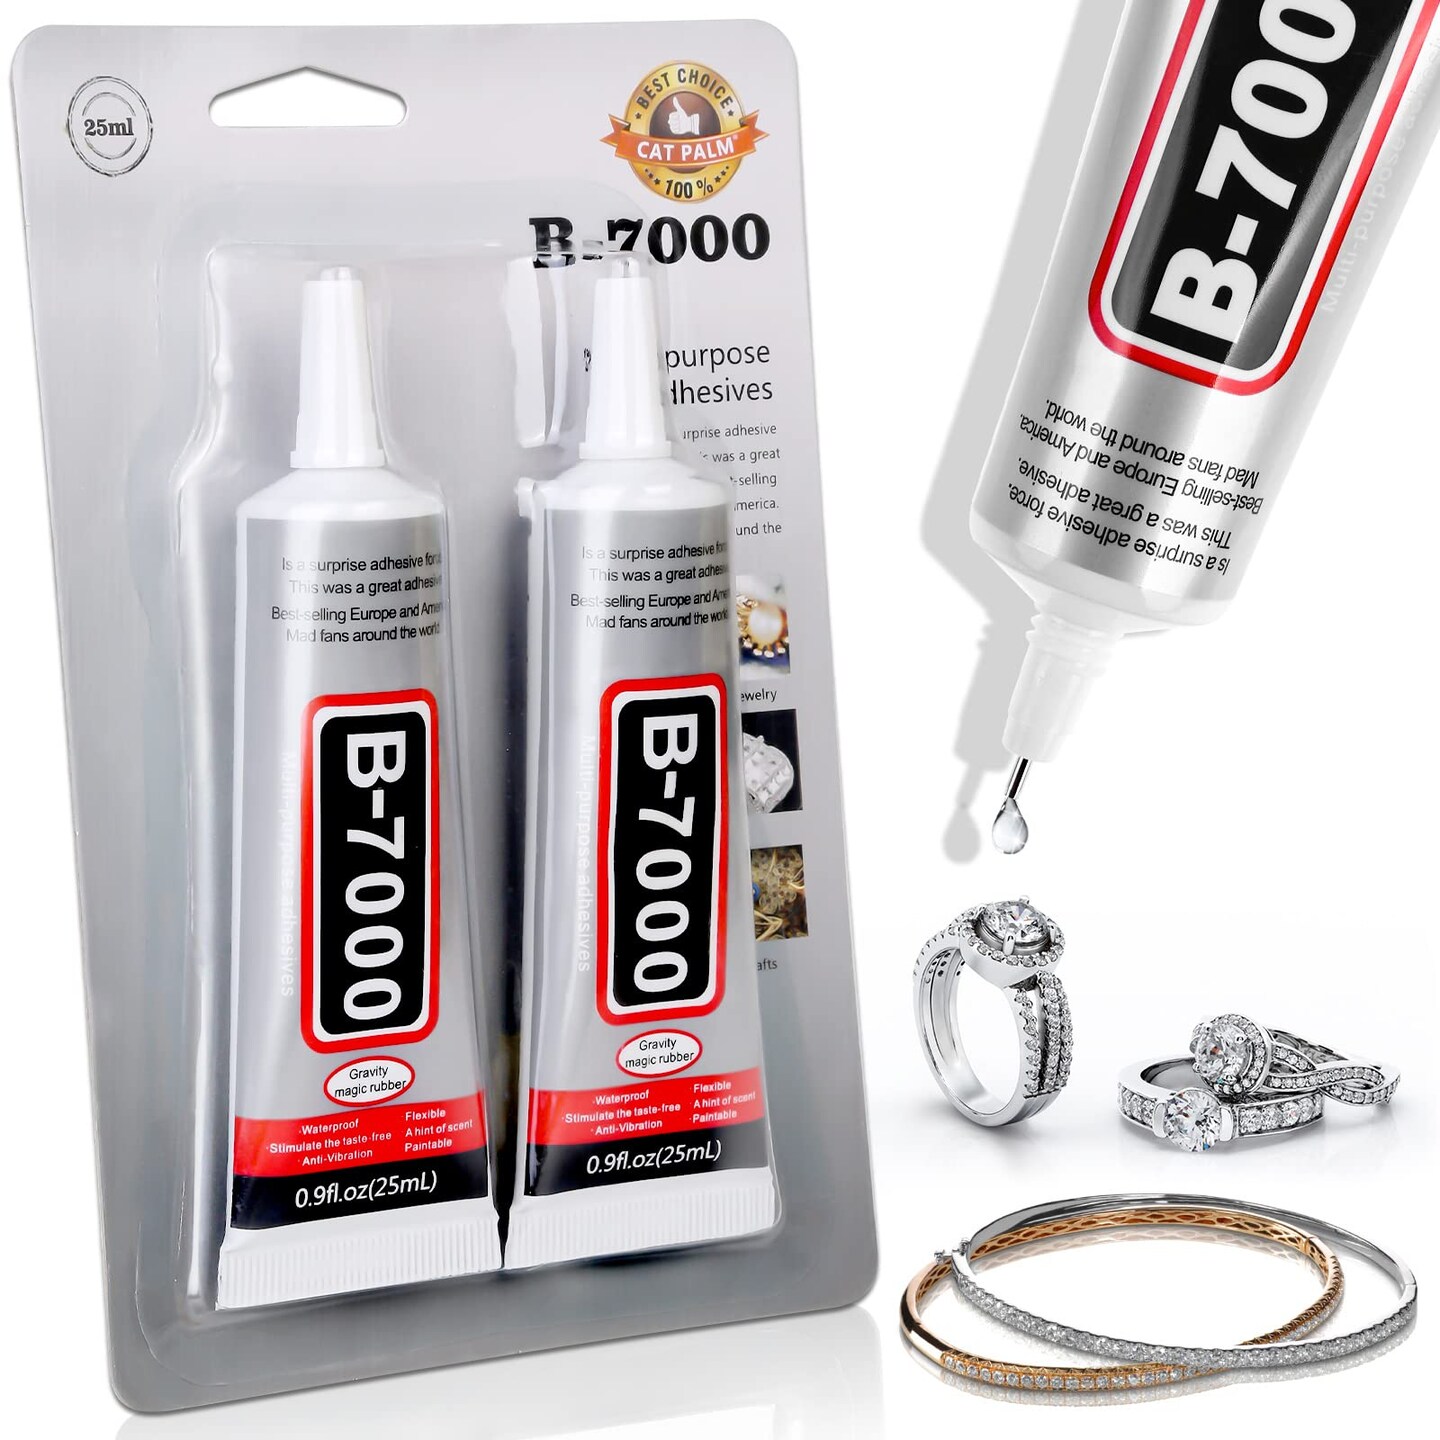 B-7000 Super Adhesive Glue for Rhinestone, B7000 Craft DIY Clear Glue for  Jewelry Making, Multi Function Glue for Fabric, Nail Art, Cell Phone  Repair